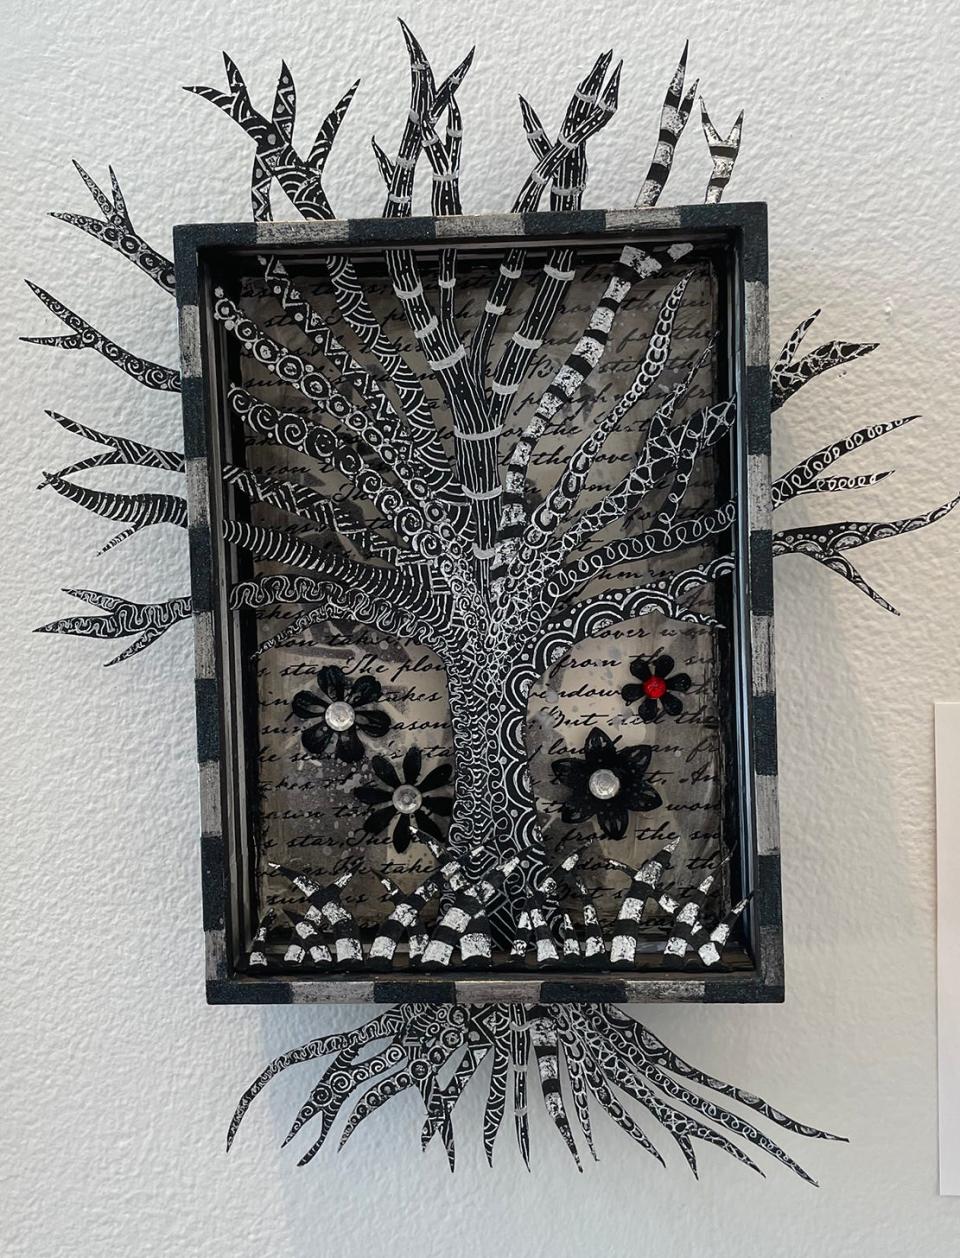 Lara Williams "Tangled Tree Magic," a mixed media diorama of a tree that was based on a book she loved reading, "The Night Circus."